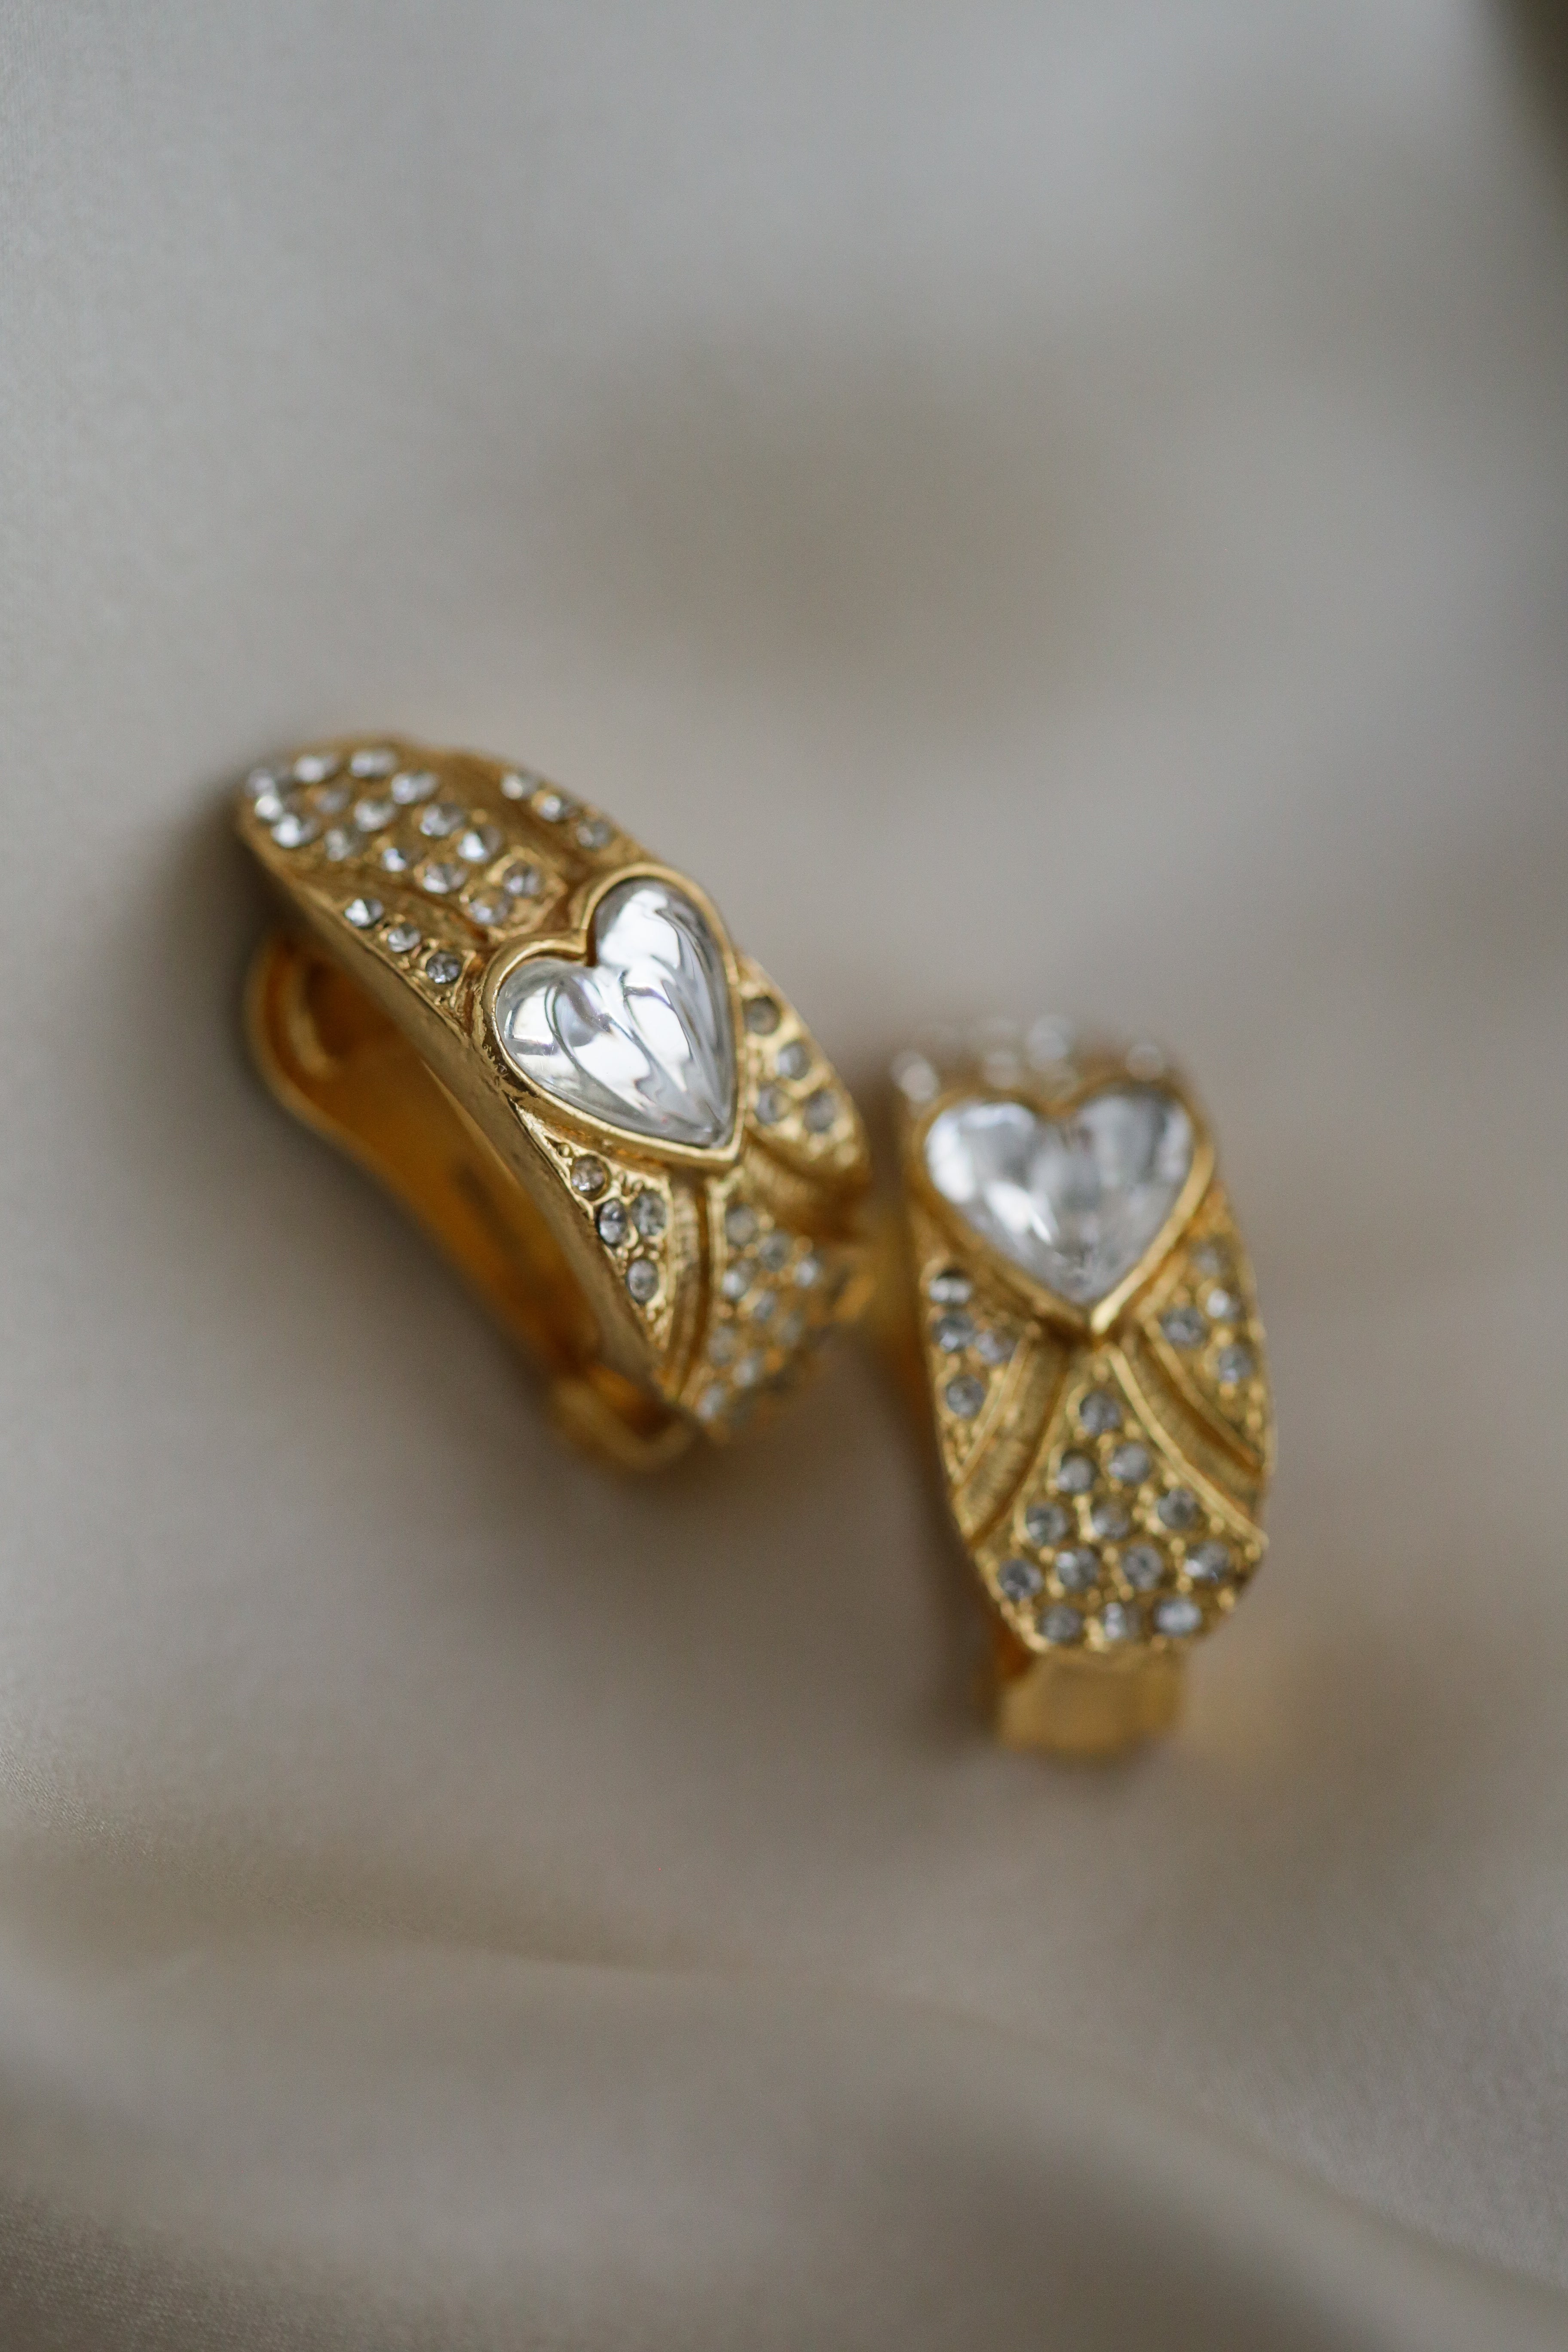 The Heart - Vintage Clip Earrings - Boutique Minimaliste has waterproof, durable, elegant and vintage inspired jewelry